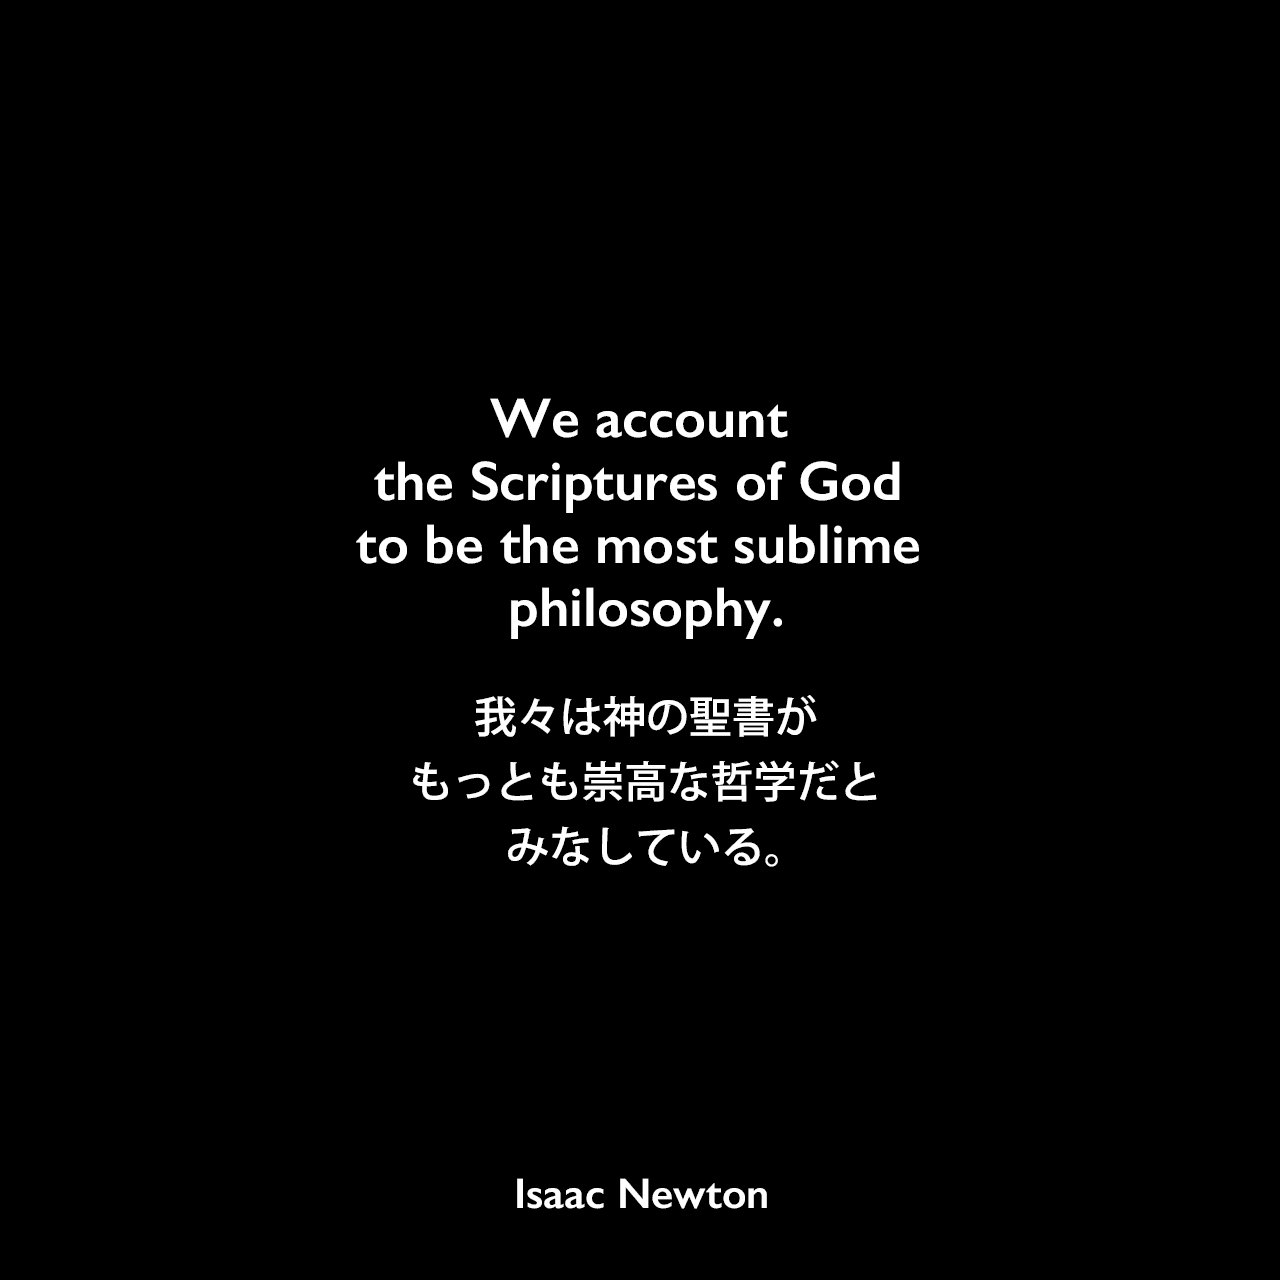 We account the Scriptures of God to be the most sublime philosophy.我々は神の聖書がもっとも崇高な哲学だとみなしている。Isaac Newton